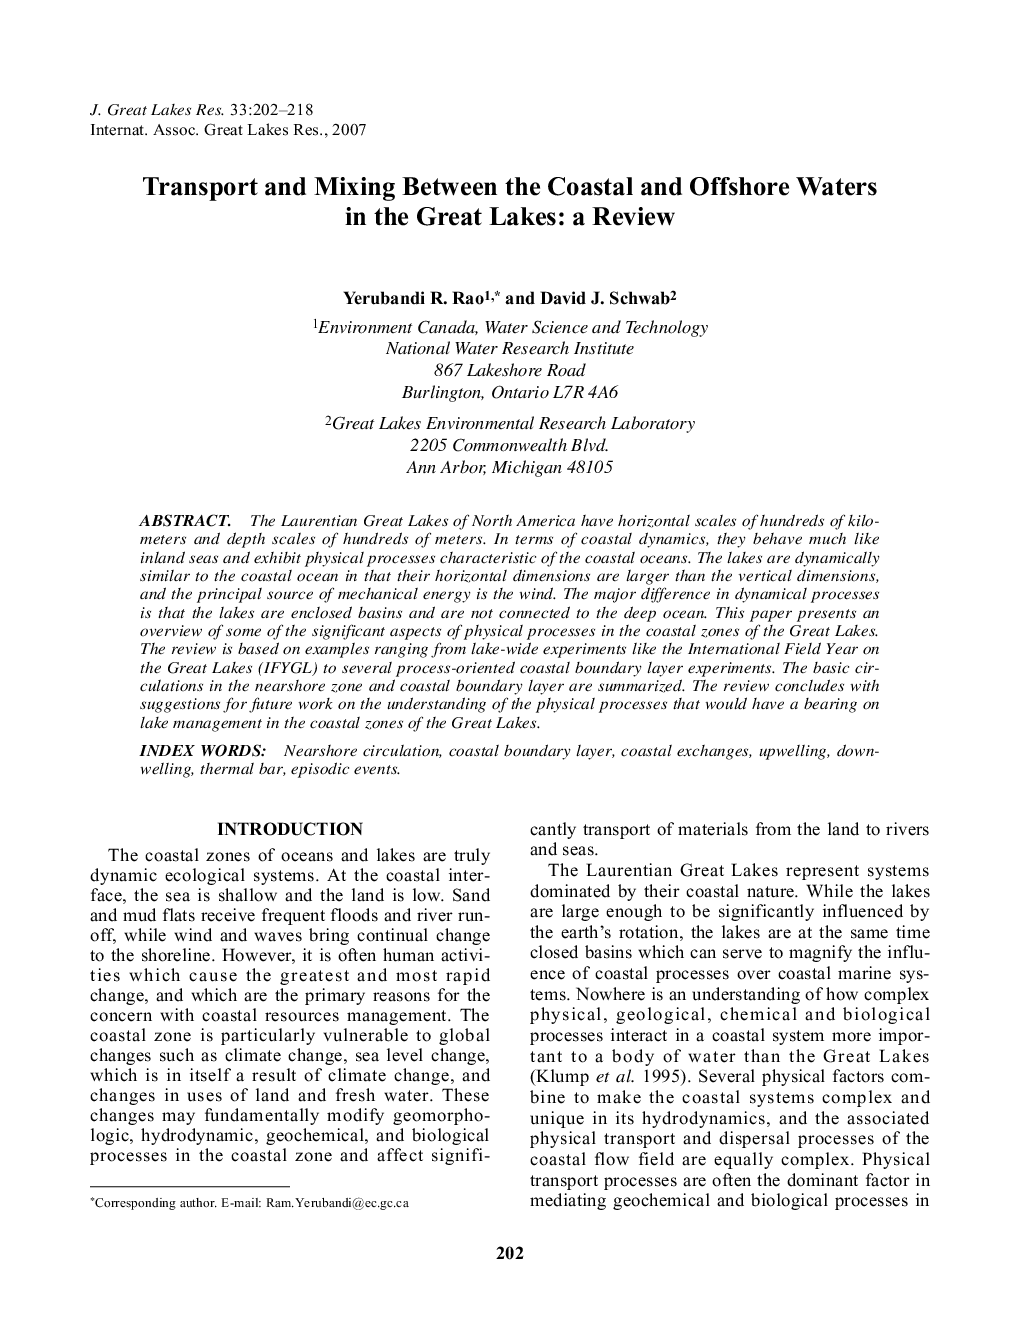 Transport and Mixing Between the Coastal and Offshore Waters in the Great Lakes: a Review